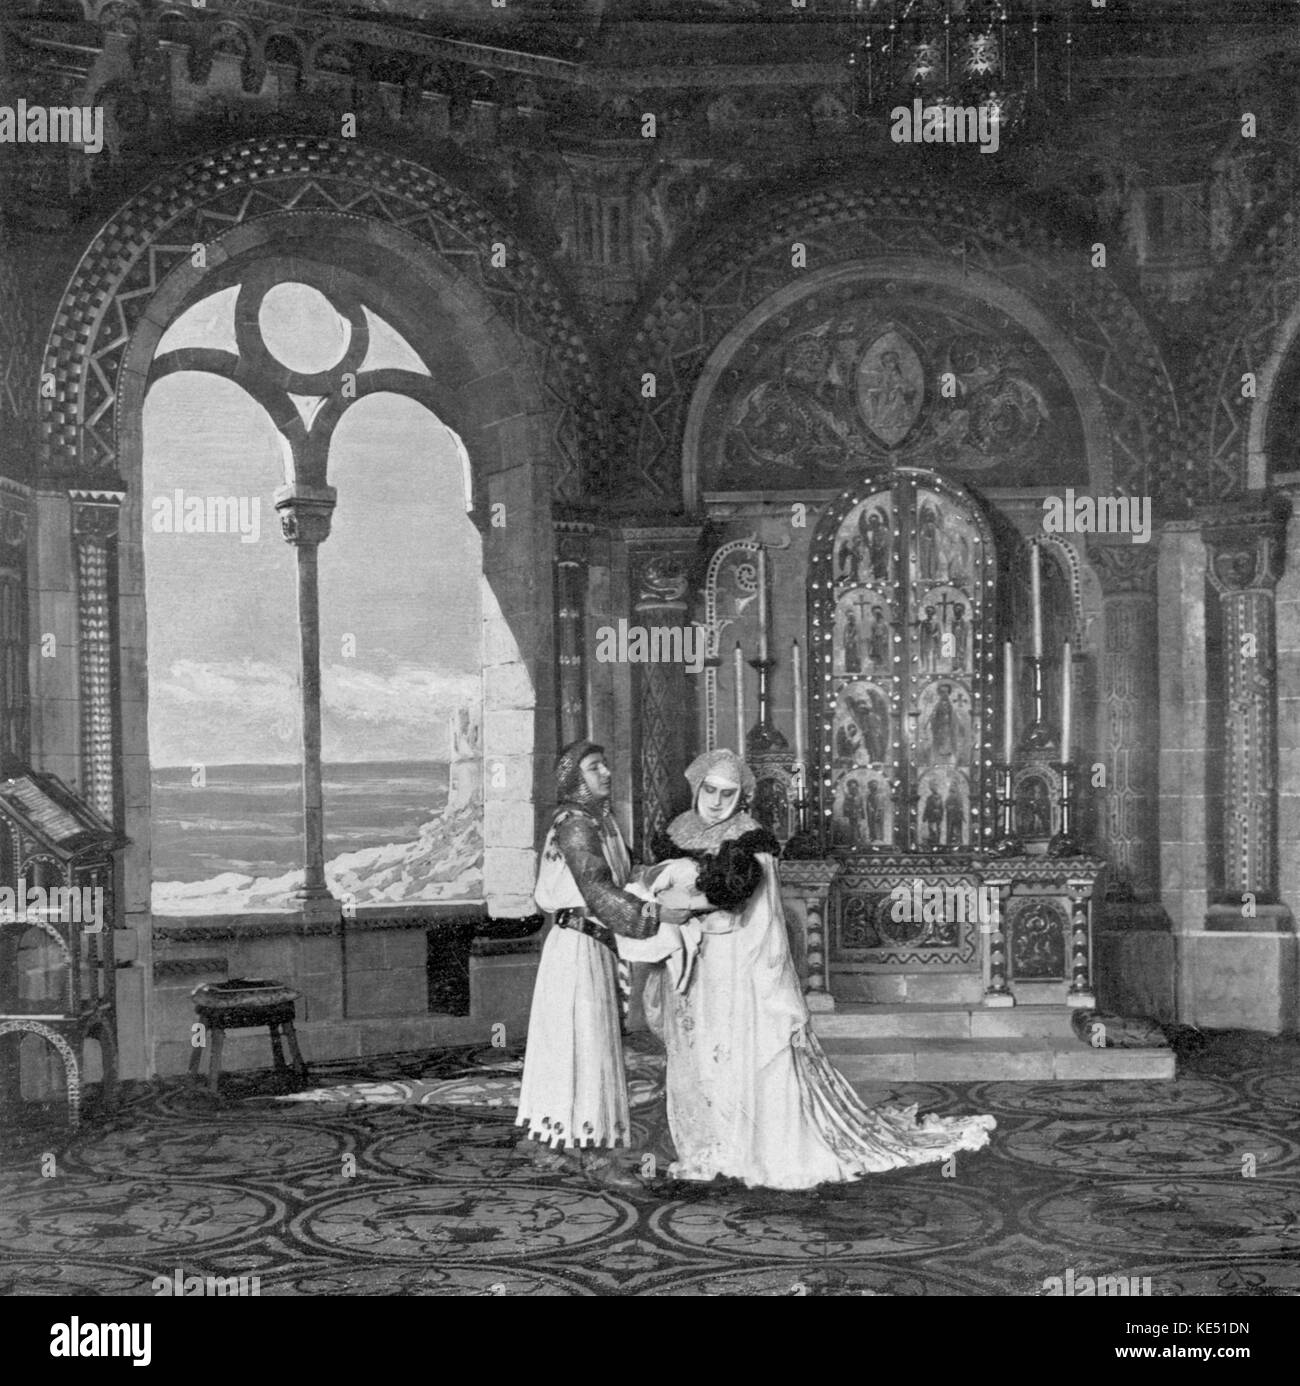 Act I of Jules Massenet 's opera Grisélidis with Hector Dufranne as the Marquis, Lucienne Bréval as Grisélidis and Petit Loys as Petite Suzanne Premiered at the Opéra -Comique, Paris, France, 20 November 1901   JM: French composer, 12 May 1842 - 13 August 1912 HD: French Bass - Baritone,  25 October 1870 - 4 May 1951 LB: French Soprano, 4 November 1869 - 15 August 1935 Stock Photo